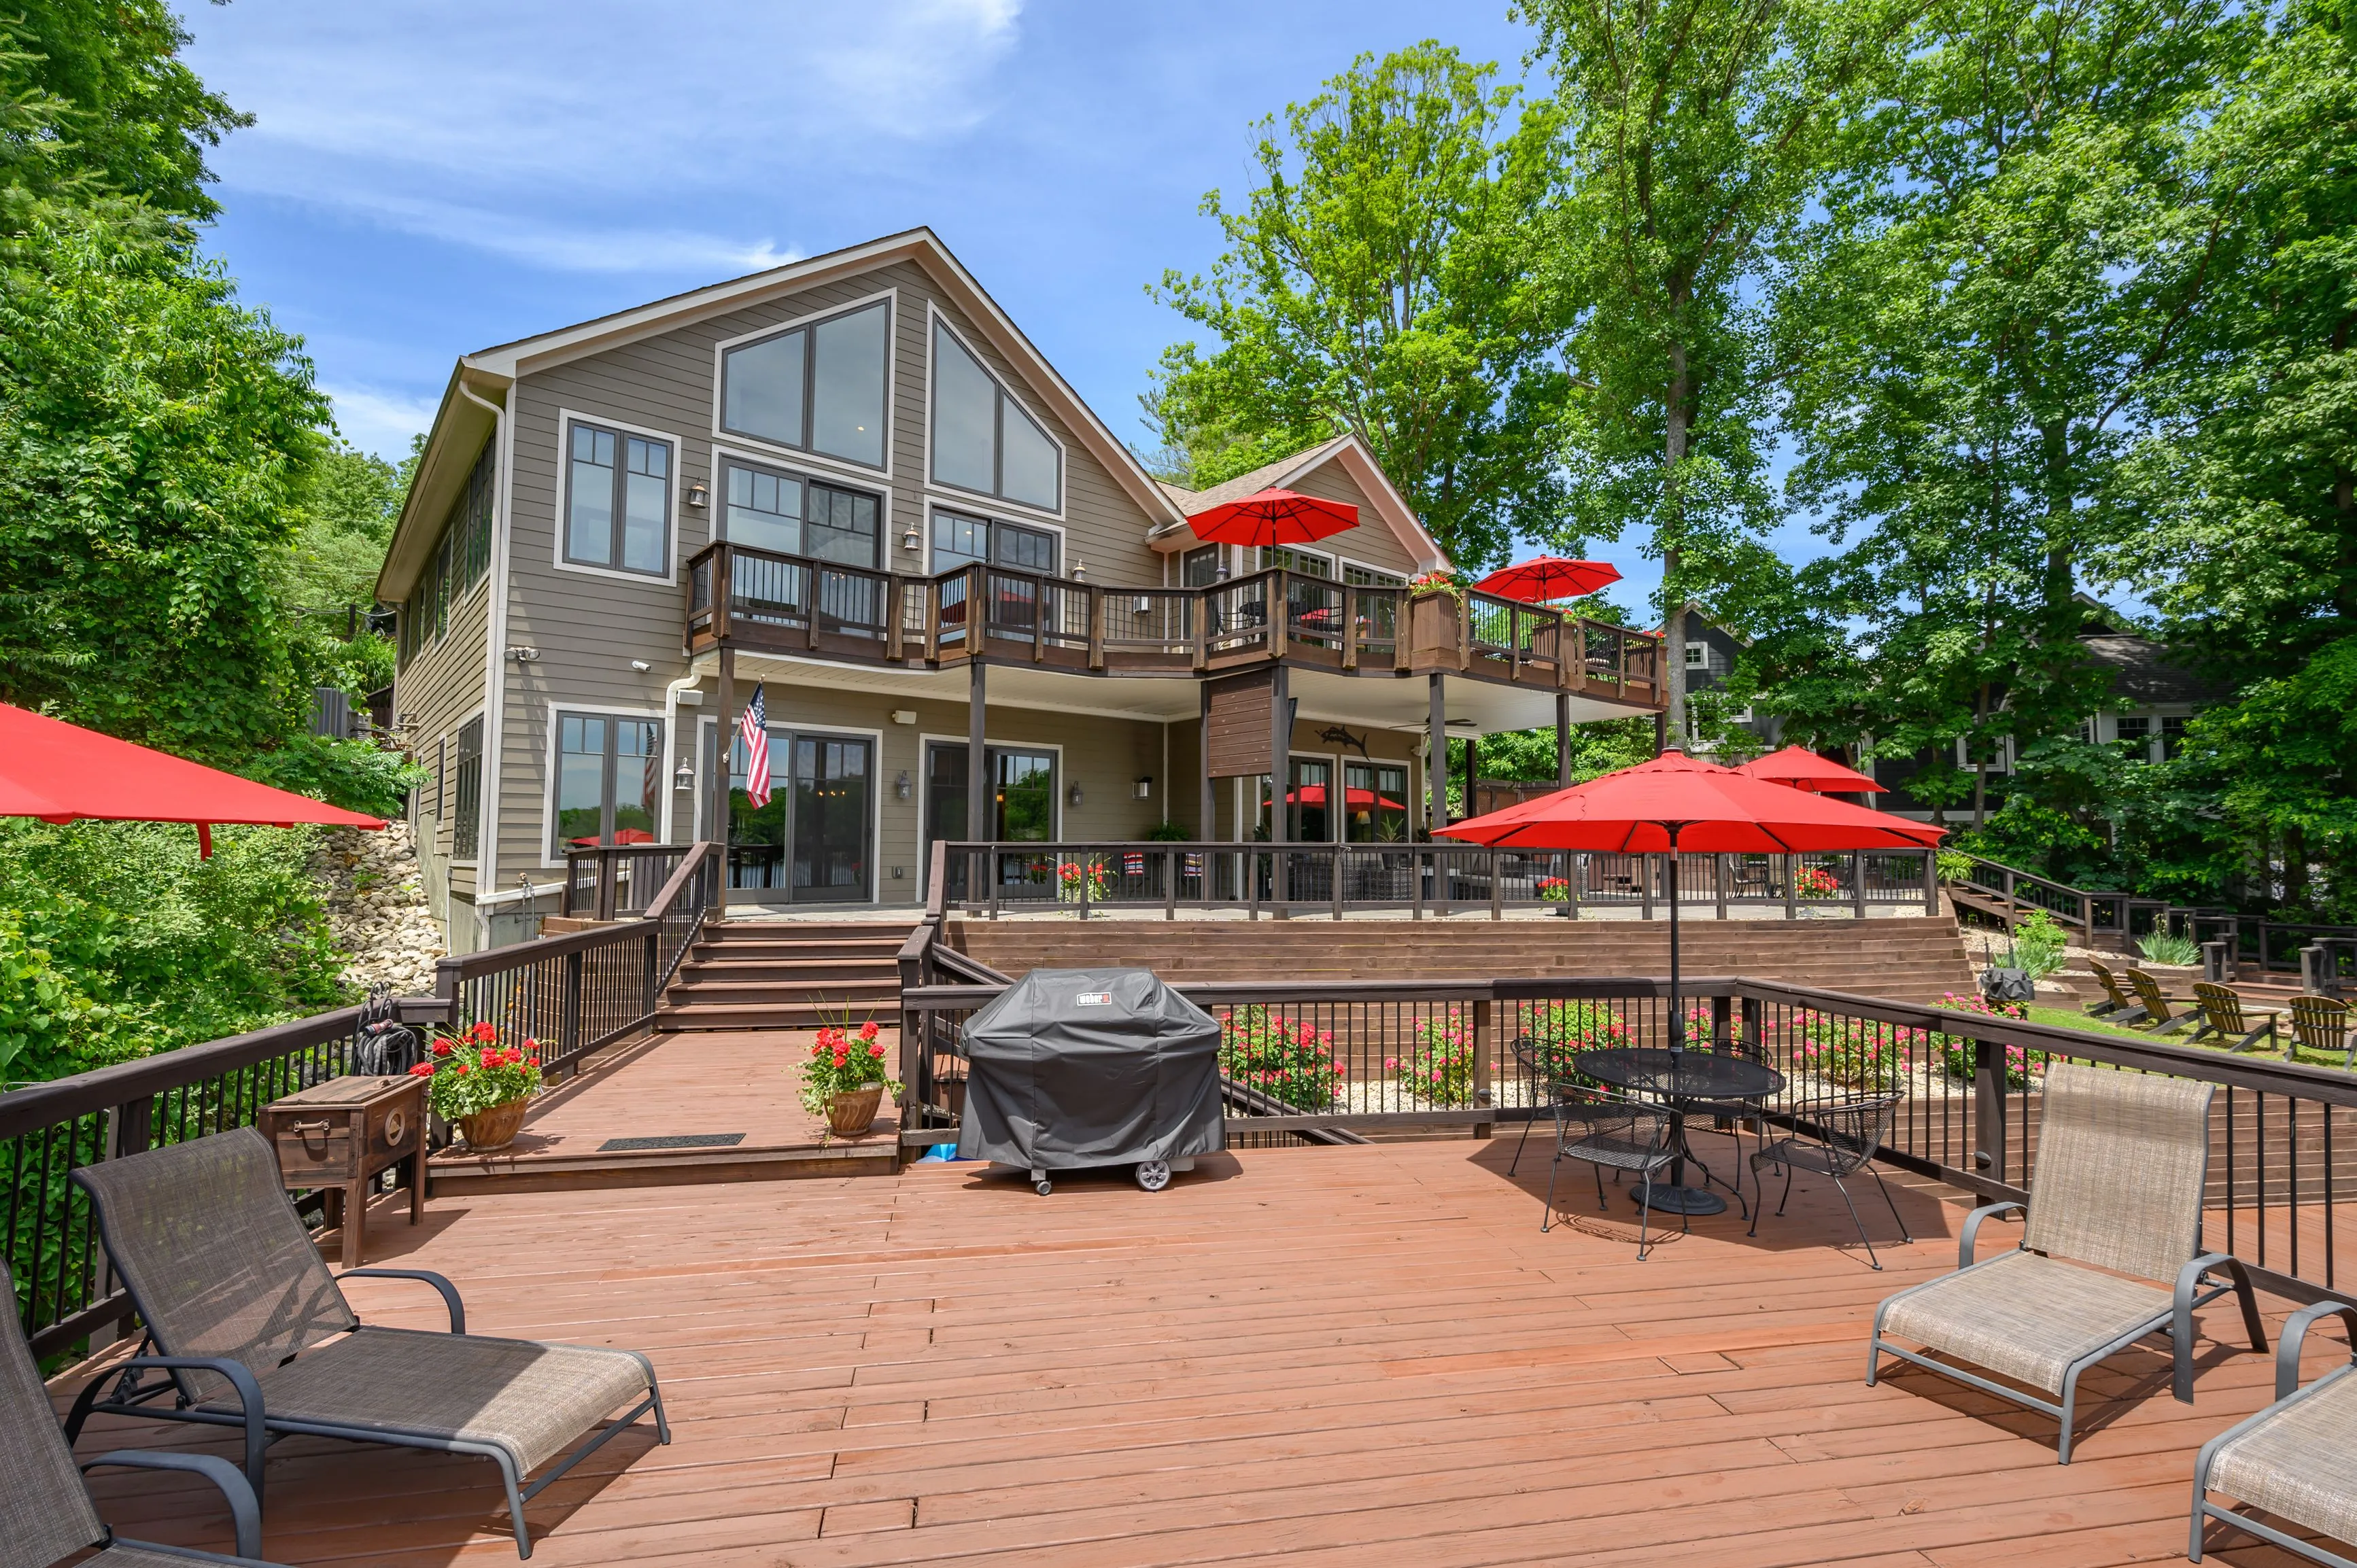 Spacious backyard patio with decking and outdoor furniture, featuring a barbecue grill and red umbrellas, with a two-story house surrounded by greenery in the background.